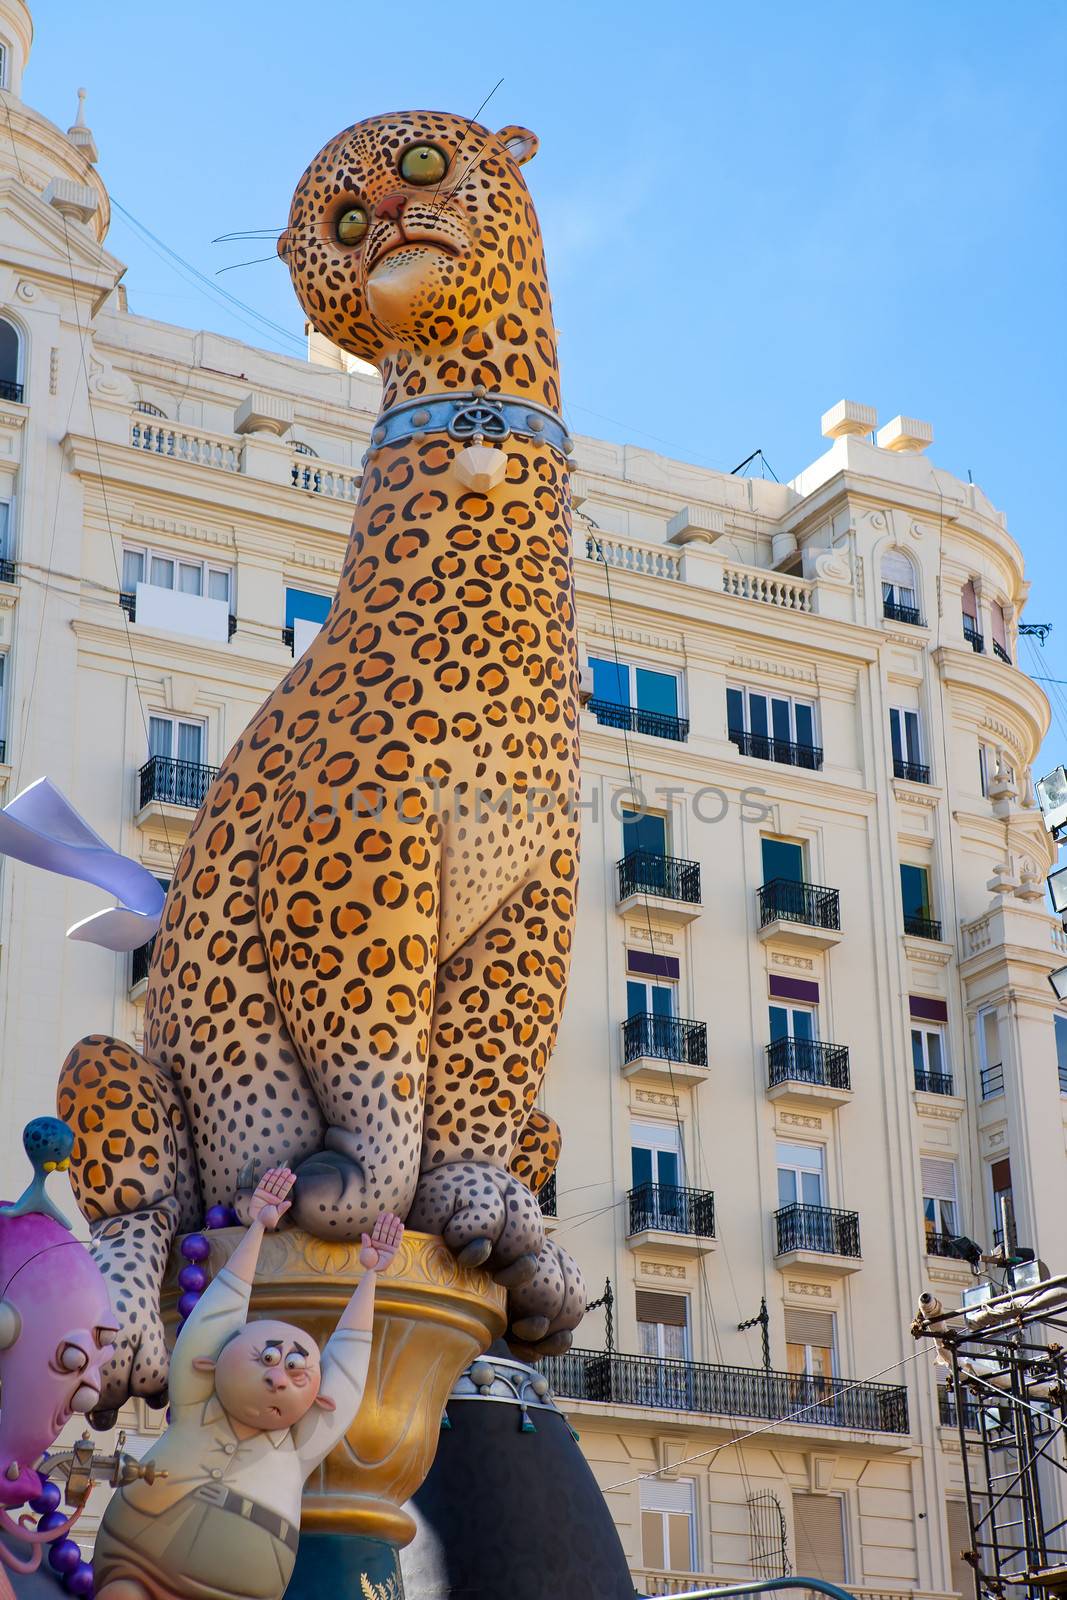 Fallas in Valencia fest figures that will burn on March 19 traditional popular celebration